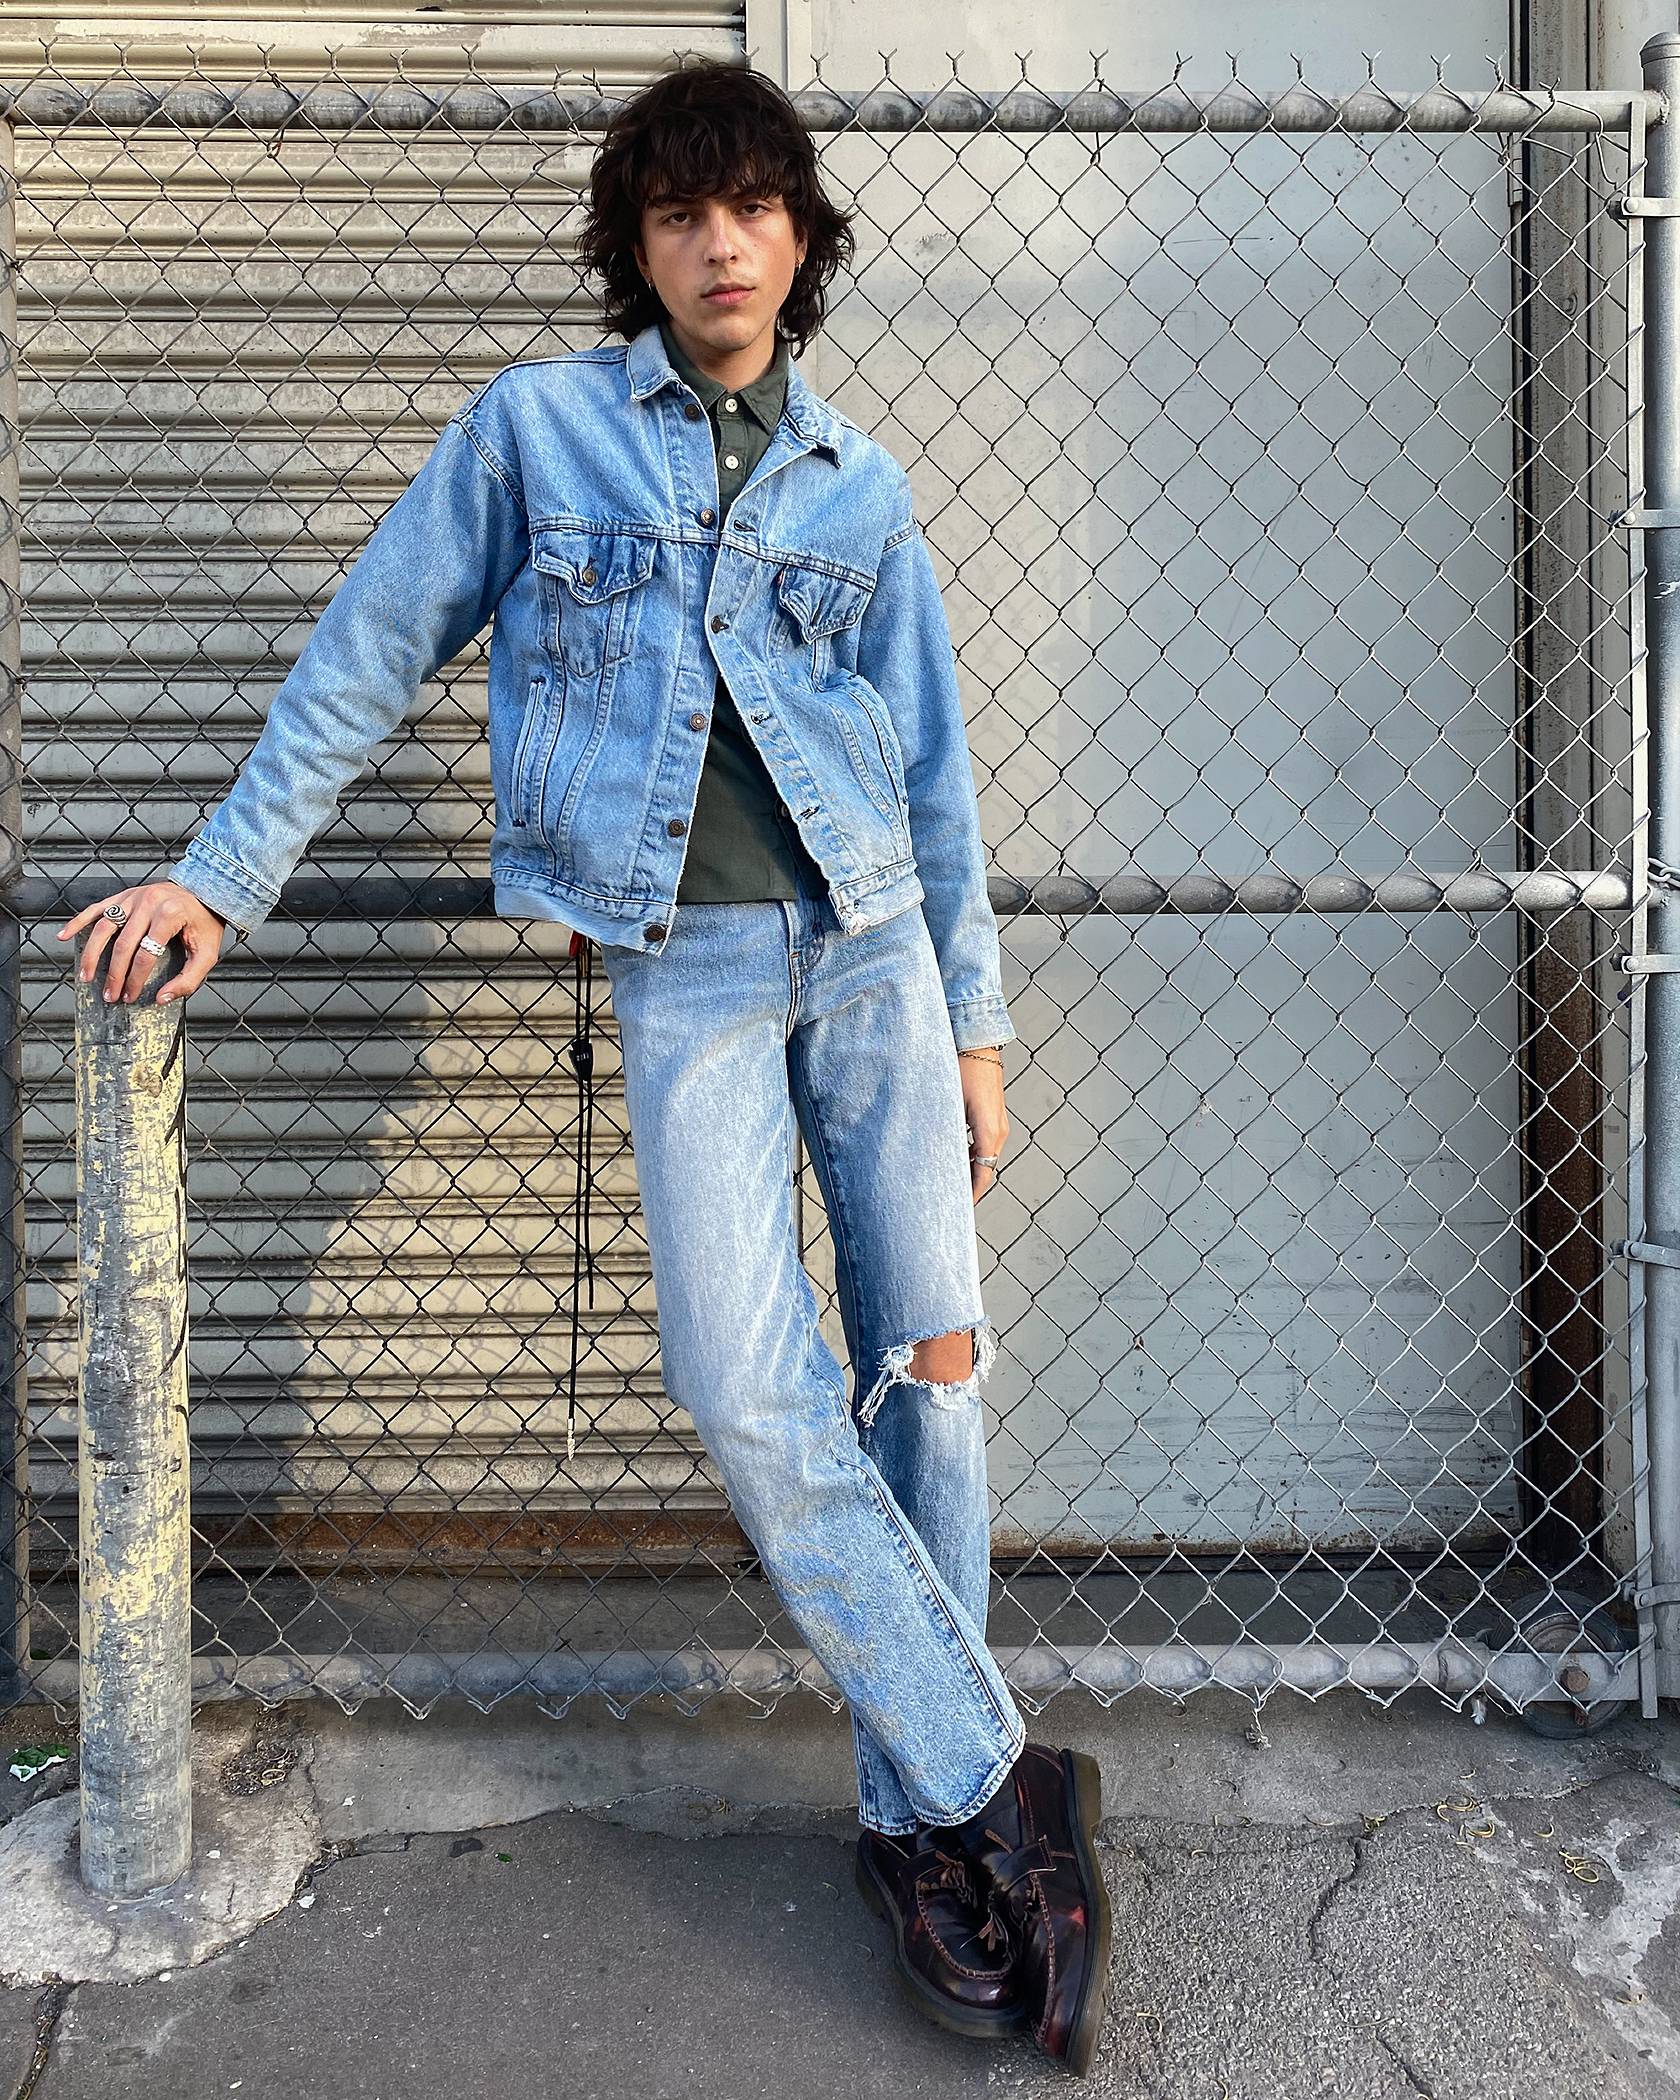 20 Ideas How To Wear Bootcut Jeans The Right Way 2021